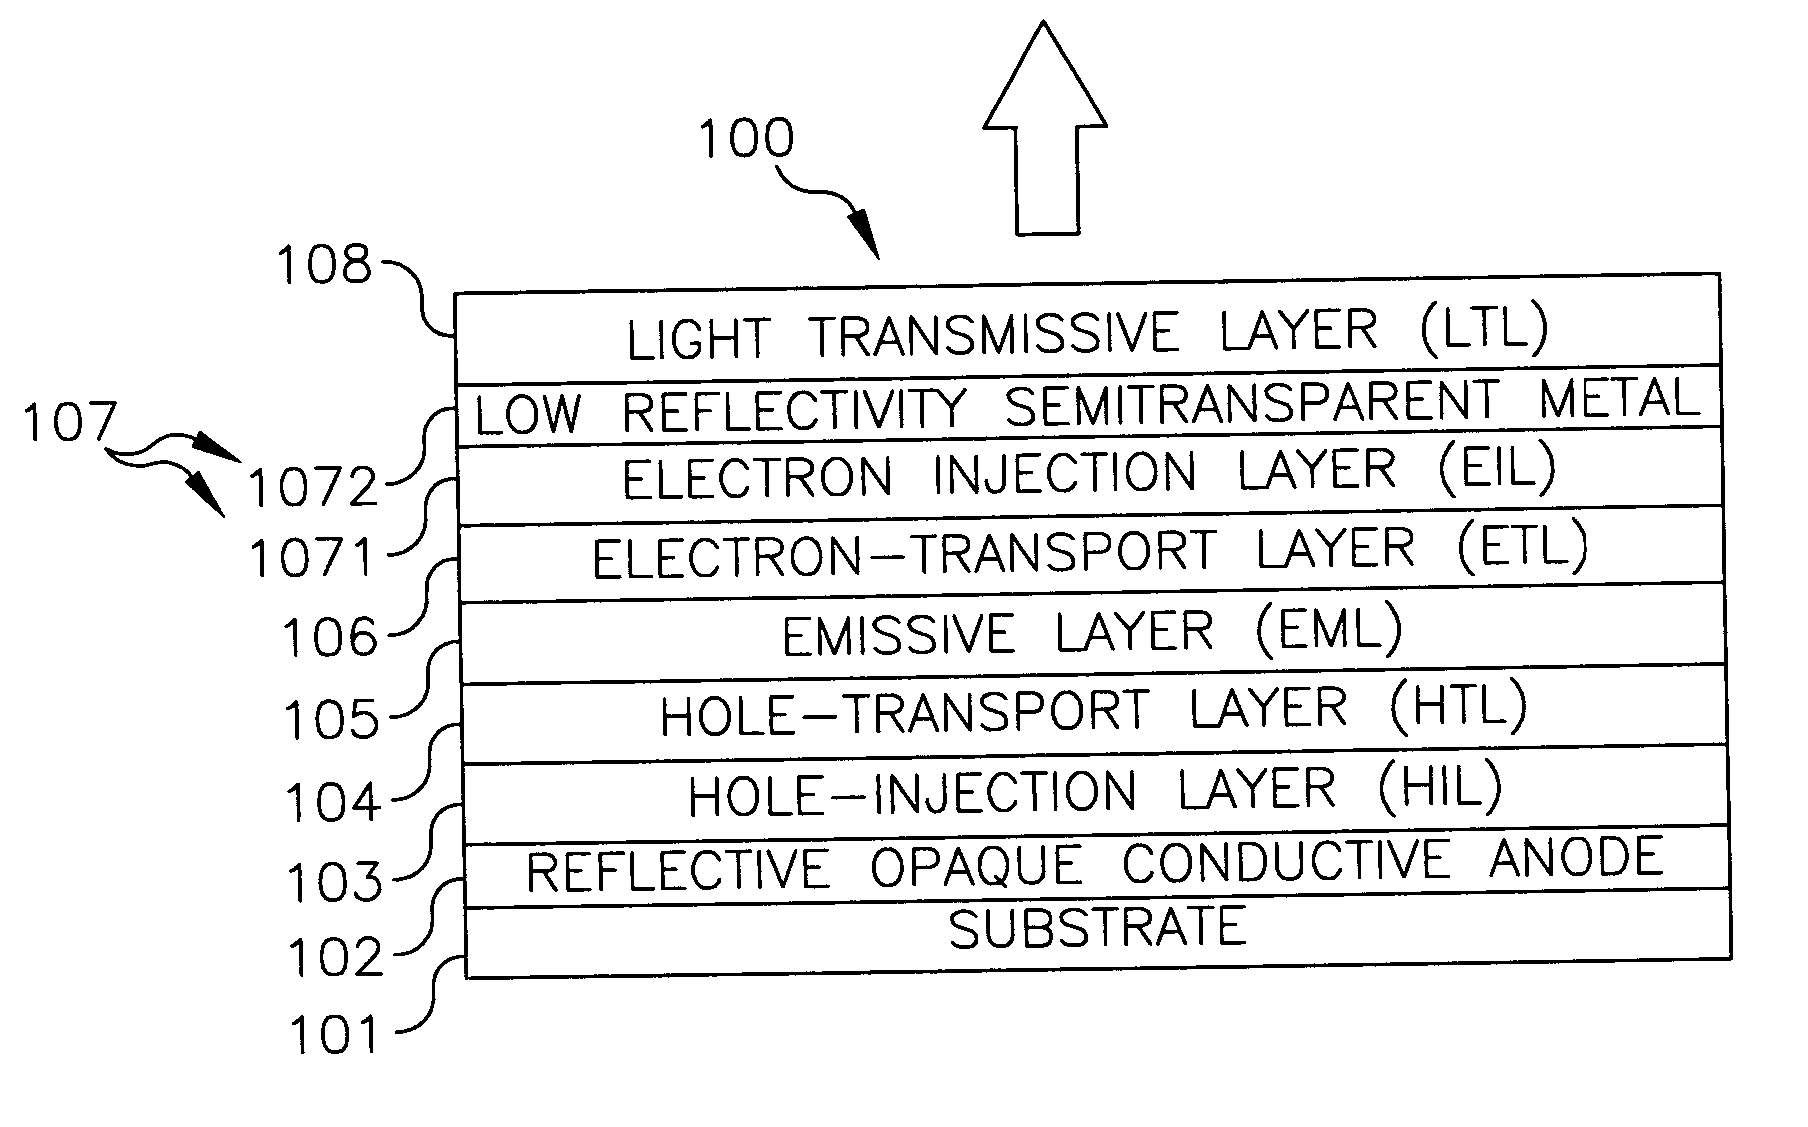 Top-emitting OLED device with improved performance